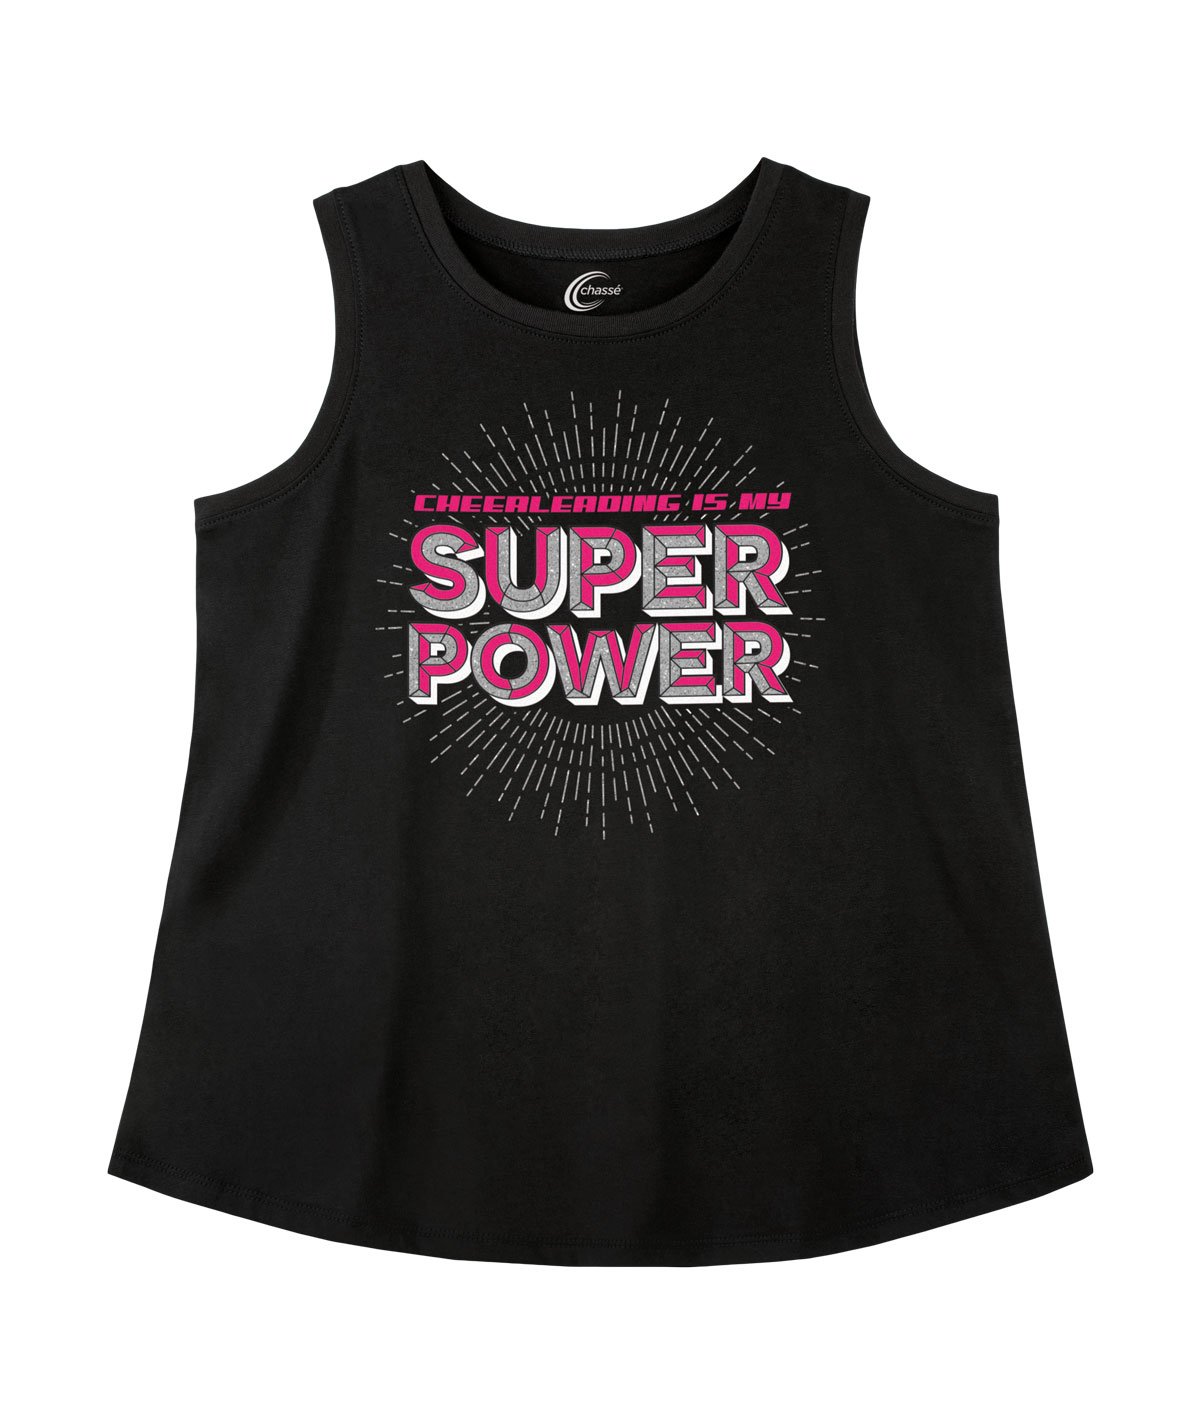 Chasse Super Power Tank